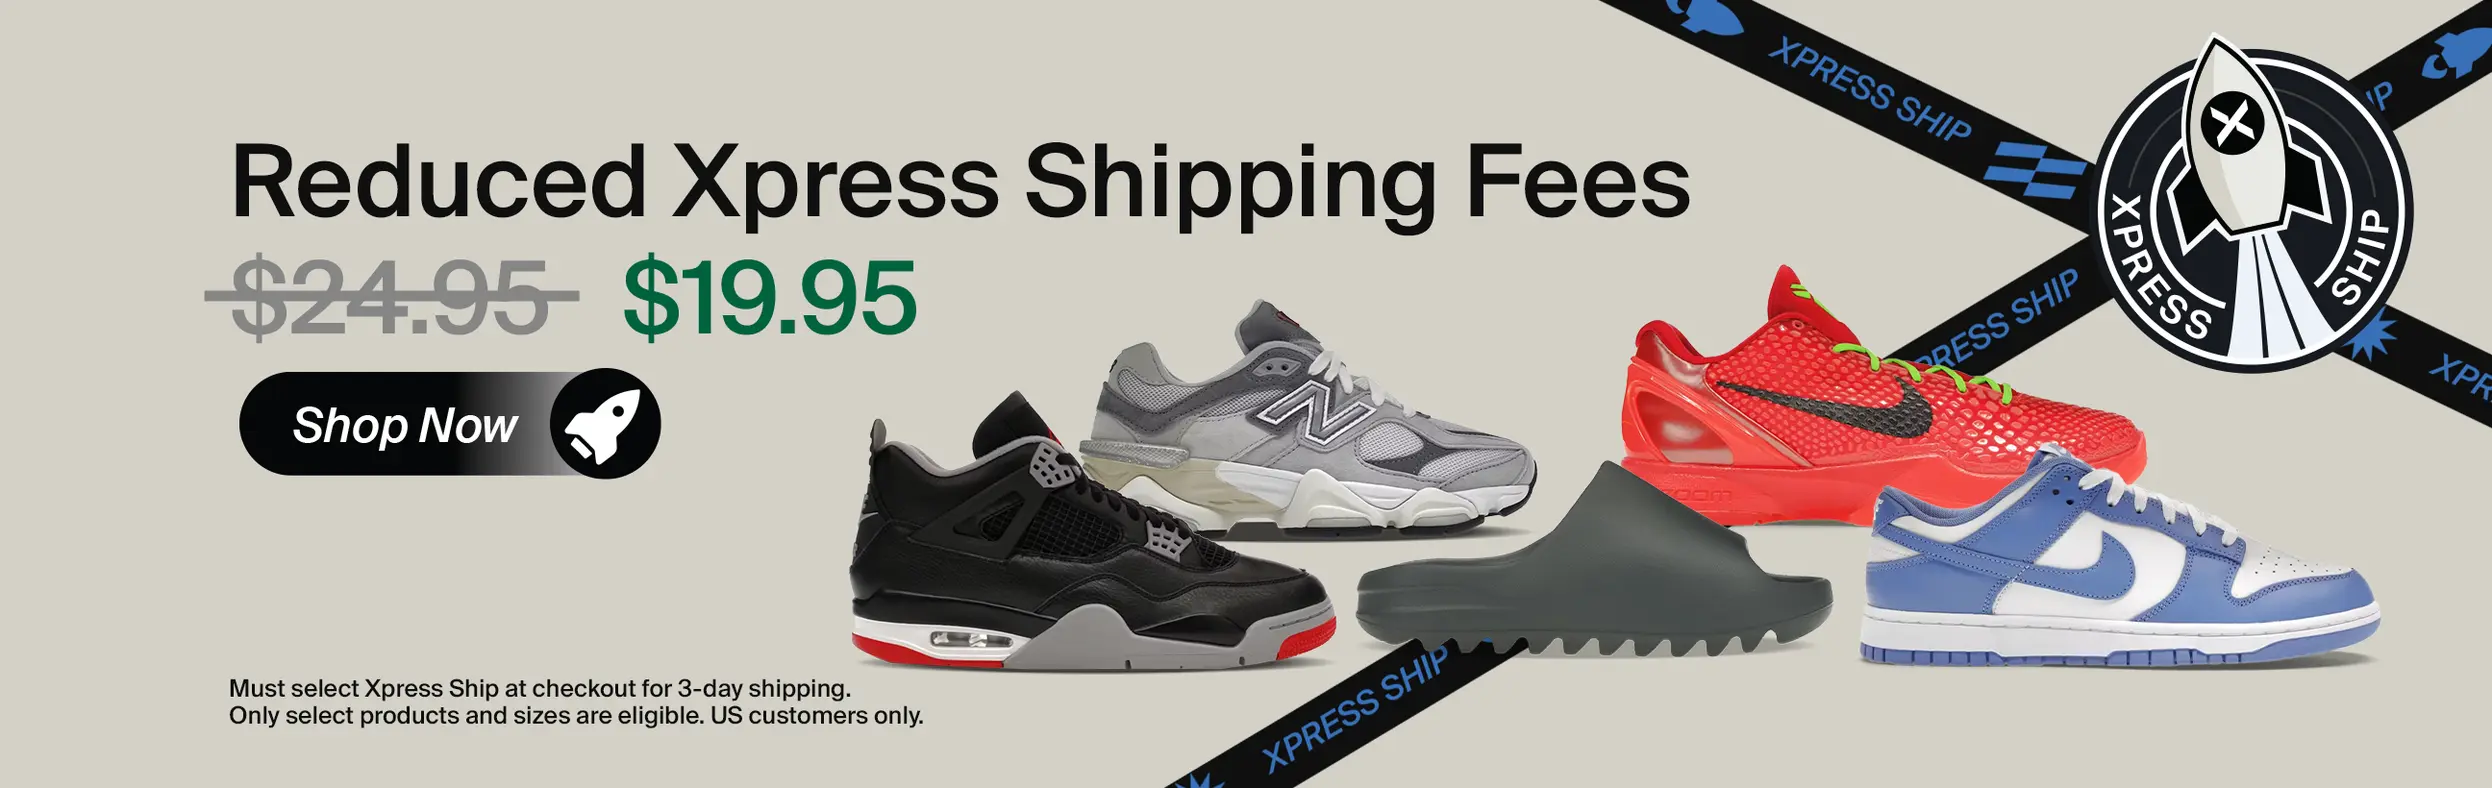 Xpress-Ship--Reduced-Shipping-Fee-Launch-(Sneakers)Primary_Desktop.png